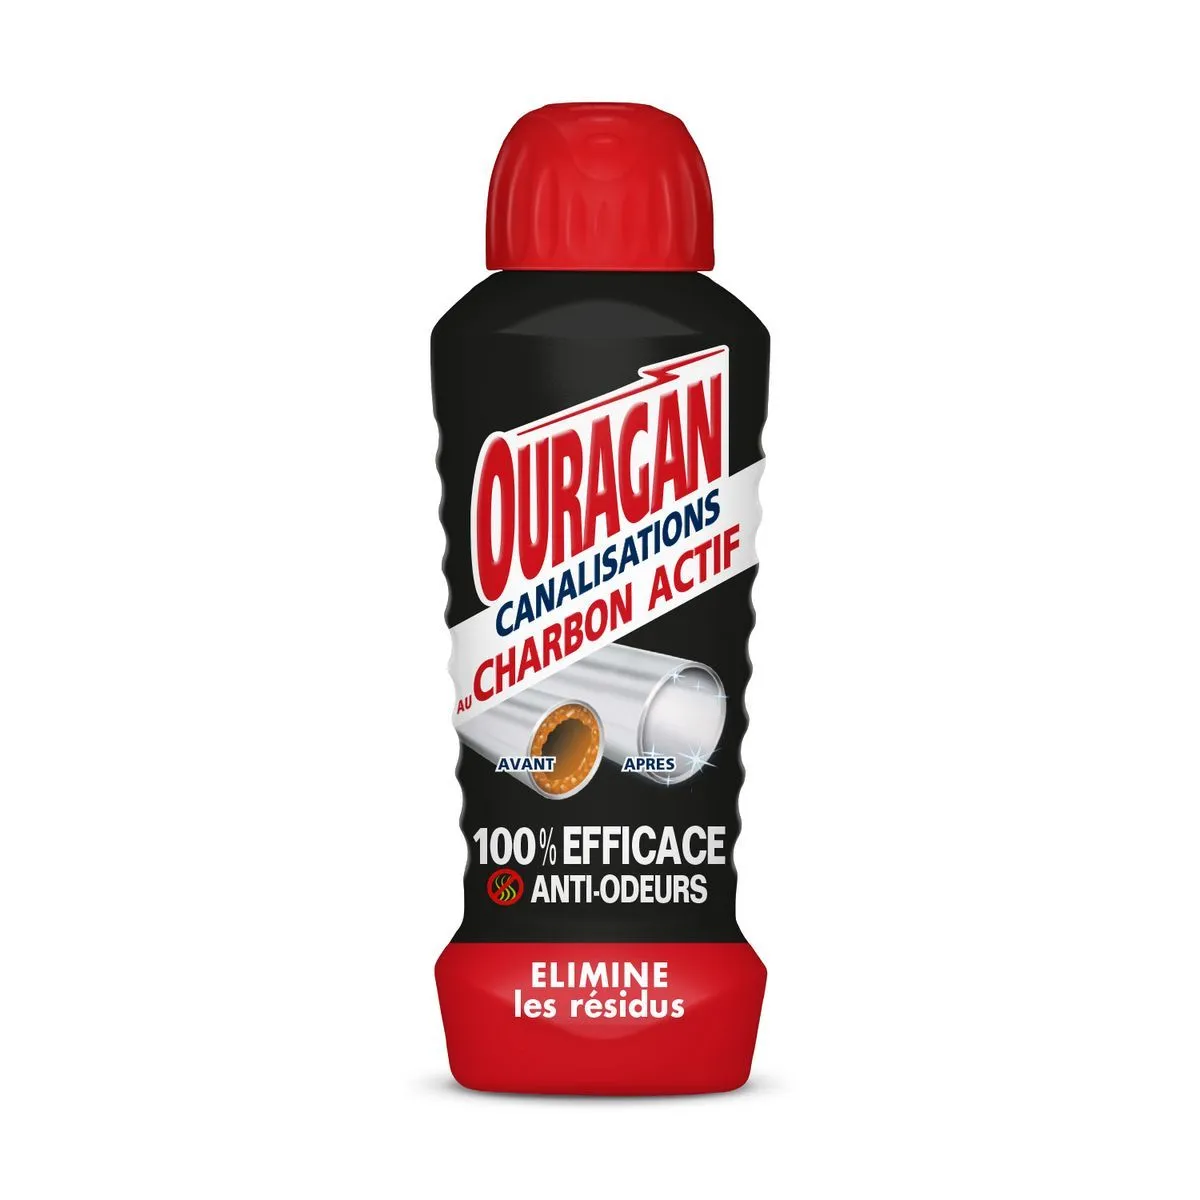 nettoyant canalisations charbon actif ouragan(1)